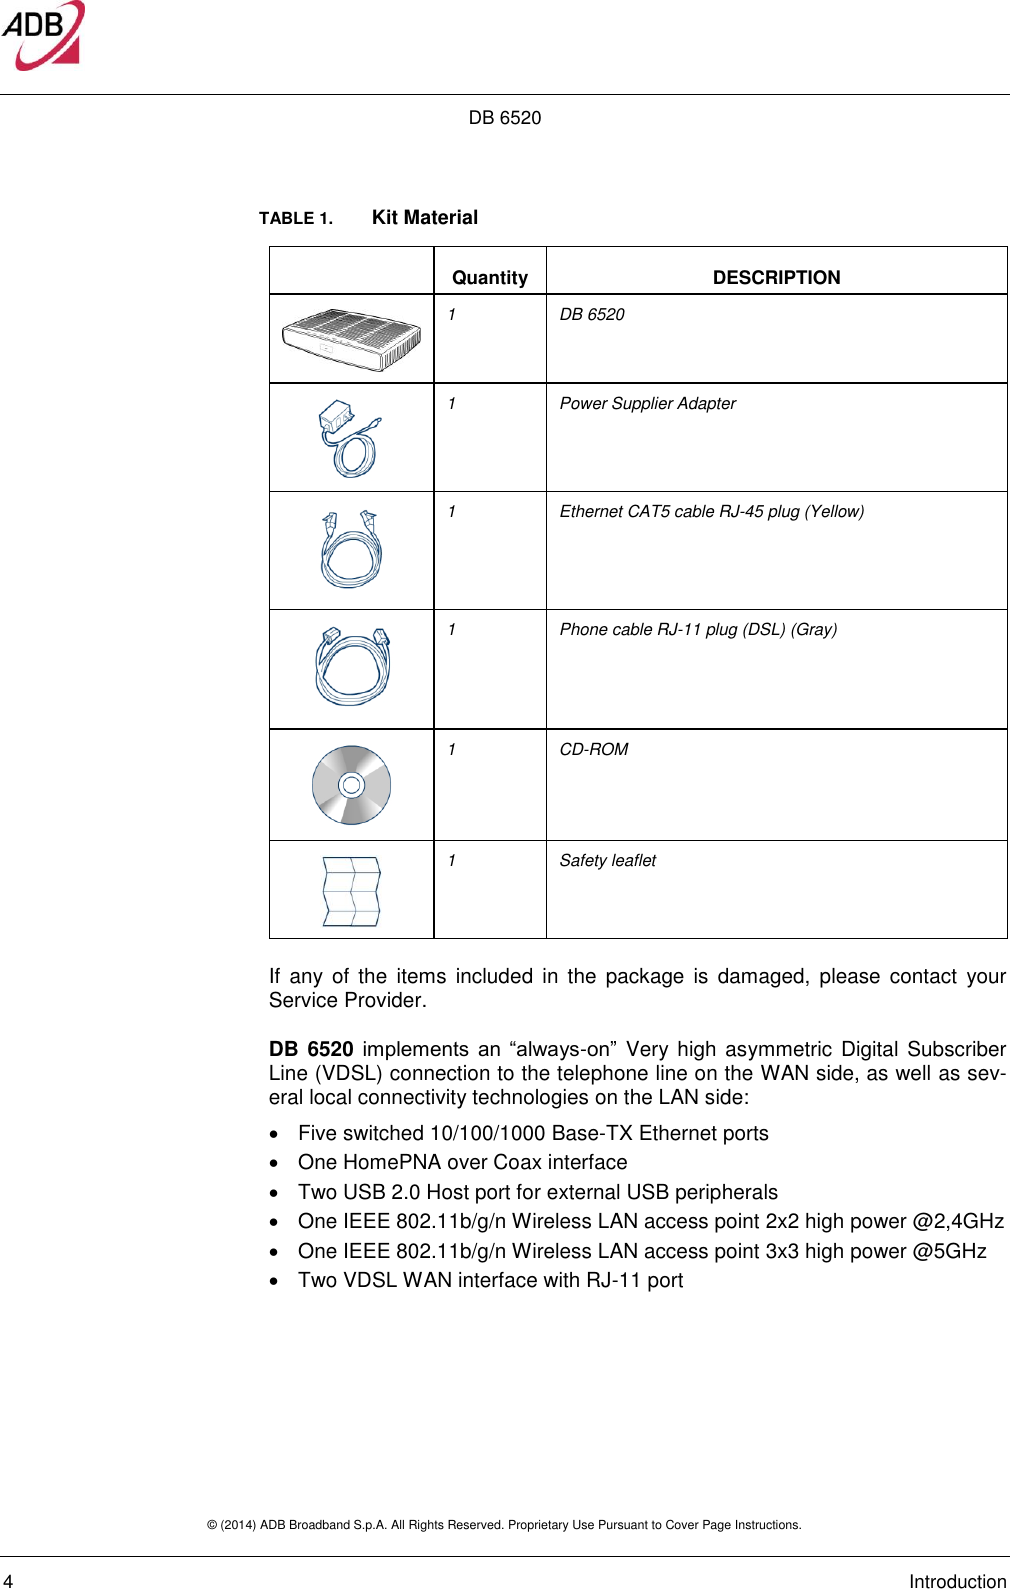 DB 6520 © (2014) ADB Broadband S.p.A. All Rights Reserved. Proprietary Use Pursuant to Cover Page Instructions.   4    Introduction TABLE 1.   Kit Material  Quantity DESCRIPTION  1 DB 6520   1 Power Supplier Adapter  1 Ethernet CAT5 cable RJ-45 plug (Yellow)  1 Phone cable RJ-11 plug (DSL) (Gray)  1 CD-ROM  1 Safety leaflet If  any of  the  items  included  in the  package  is  damaged,  please  contact  your Service Provider. DB 6520 implements  an  “always-on”  Very high  asymmetric Digital Subscriber Line (VDSL) connection to the telephone line on the WAN side, as well as sev-eral local connectivity technologies on the LAN side:   Five switched 10/100/1000 Base-TX Ethernet ports   One HomePNA over Coax interface  Two USB 2.0 Host port for external USB peripherals   One IEEE 802.11b/g/n Wireless LAN access point 2x2 high power @2,4GHz   One IEEE 802.11b/g/n Wireless LAN access point 3x3 high power @5GHz   Two VDSL WAN interface with RJ-11 port   